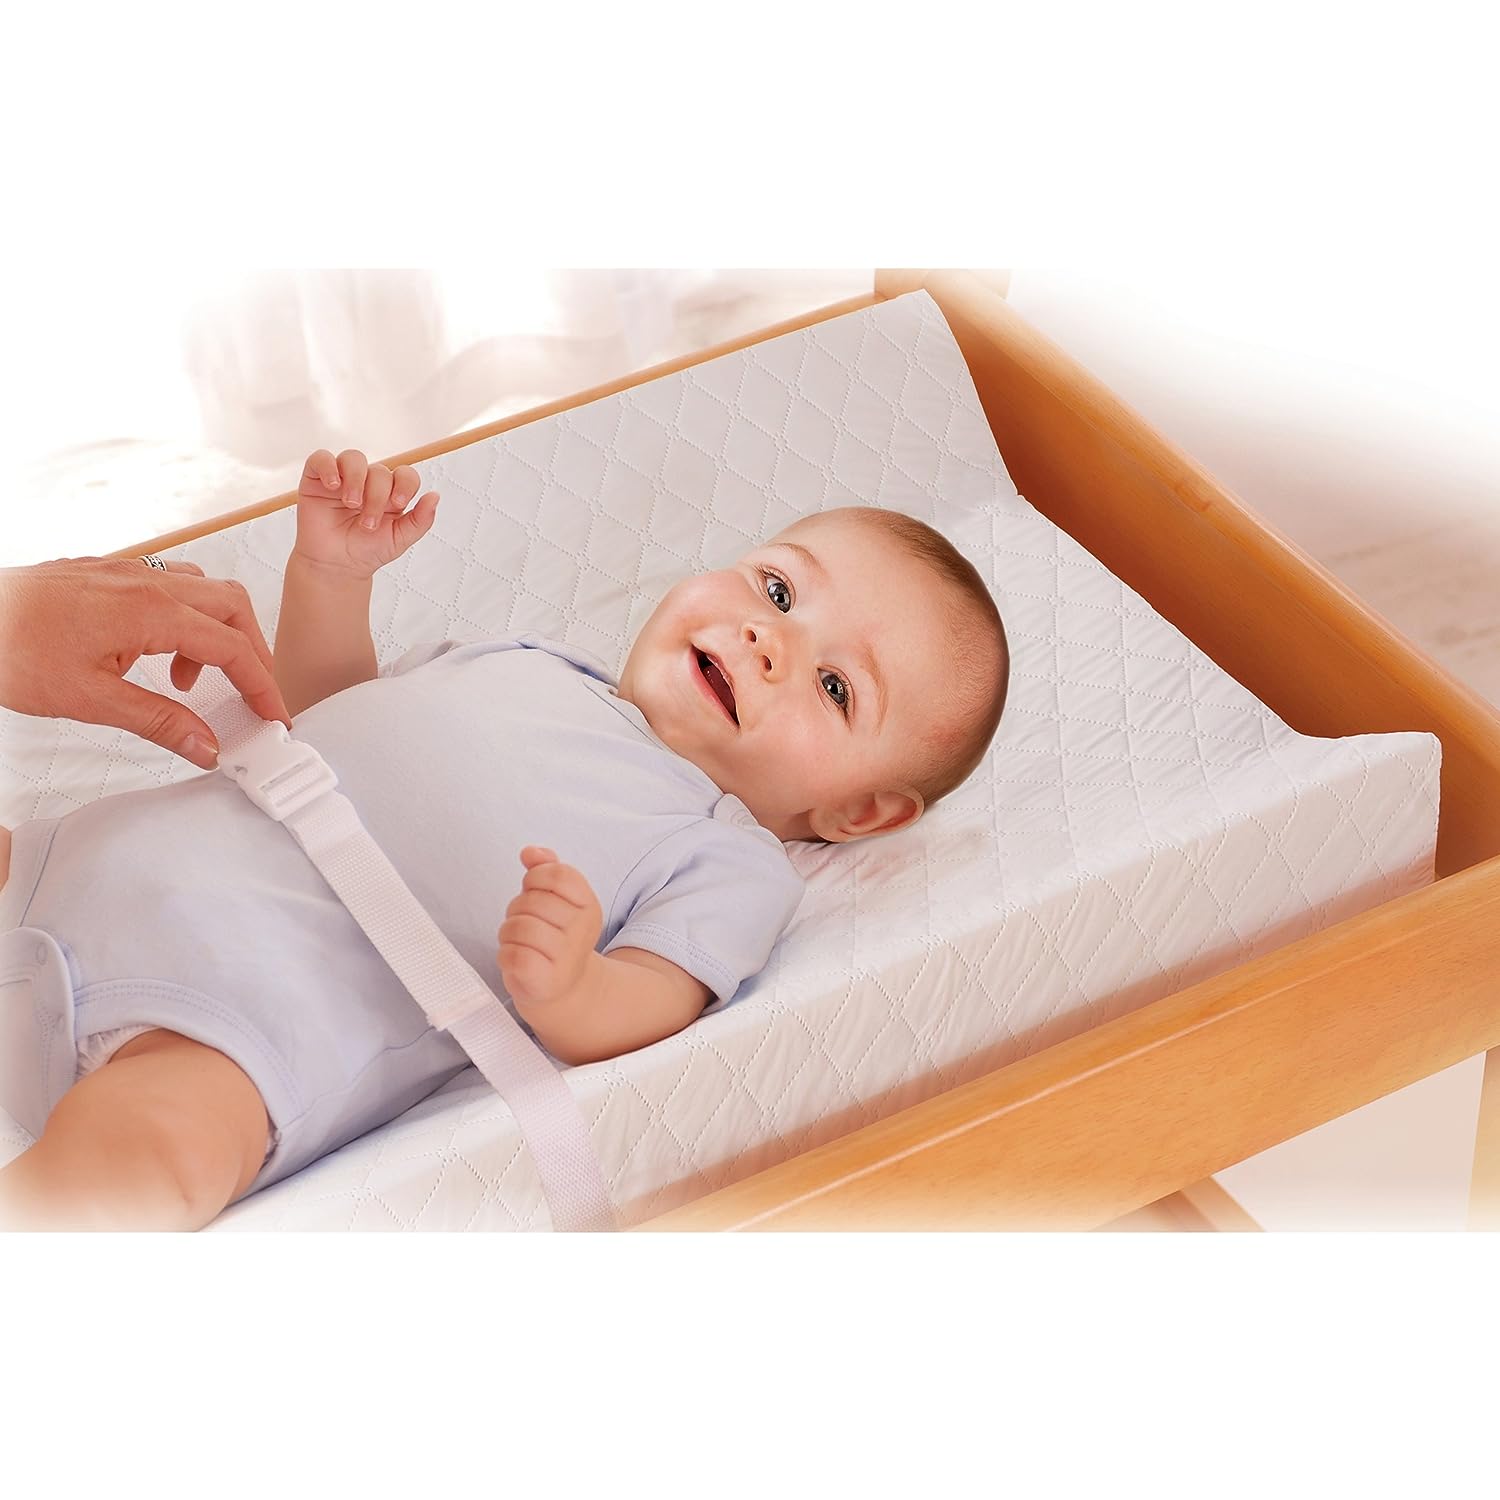 Summer Infants - 2 Sided Contour Change Pad (White)